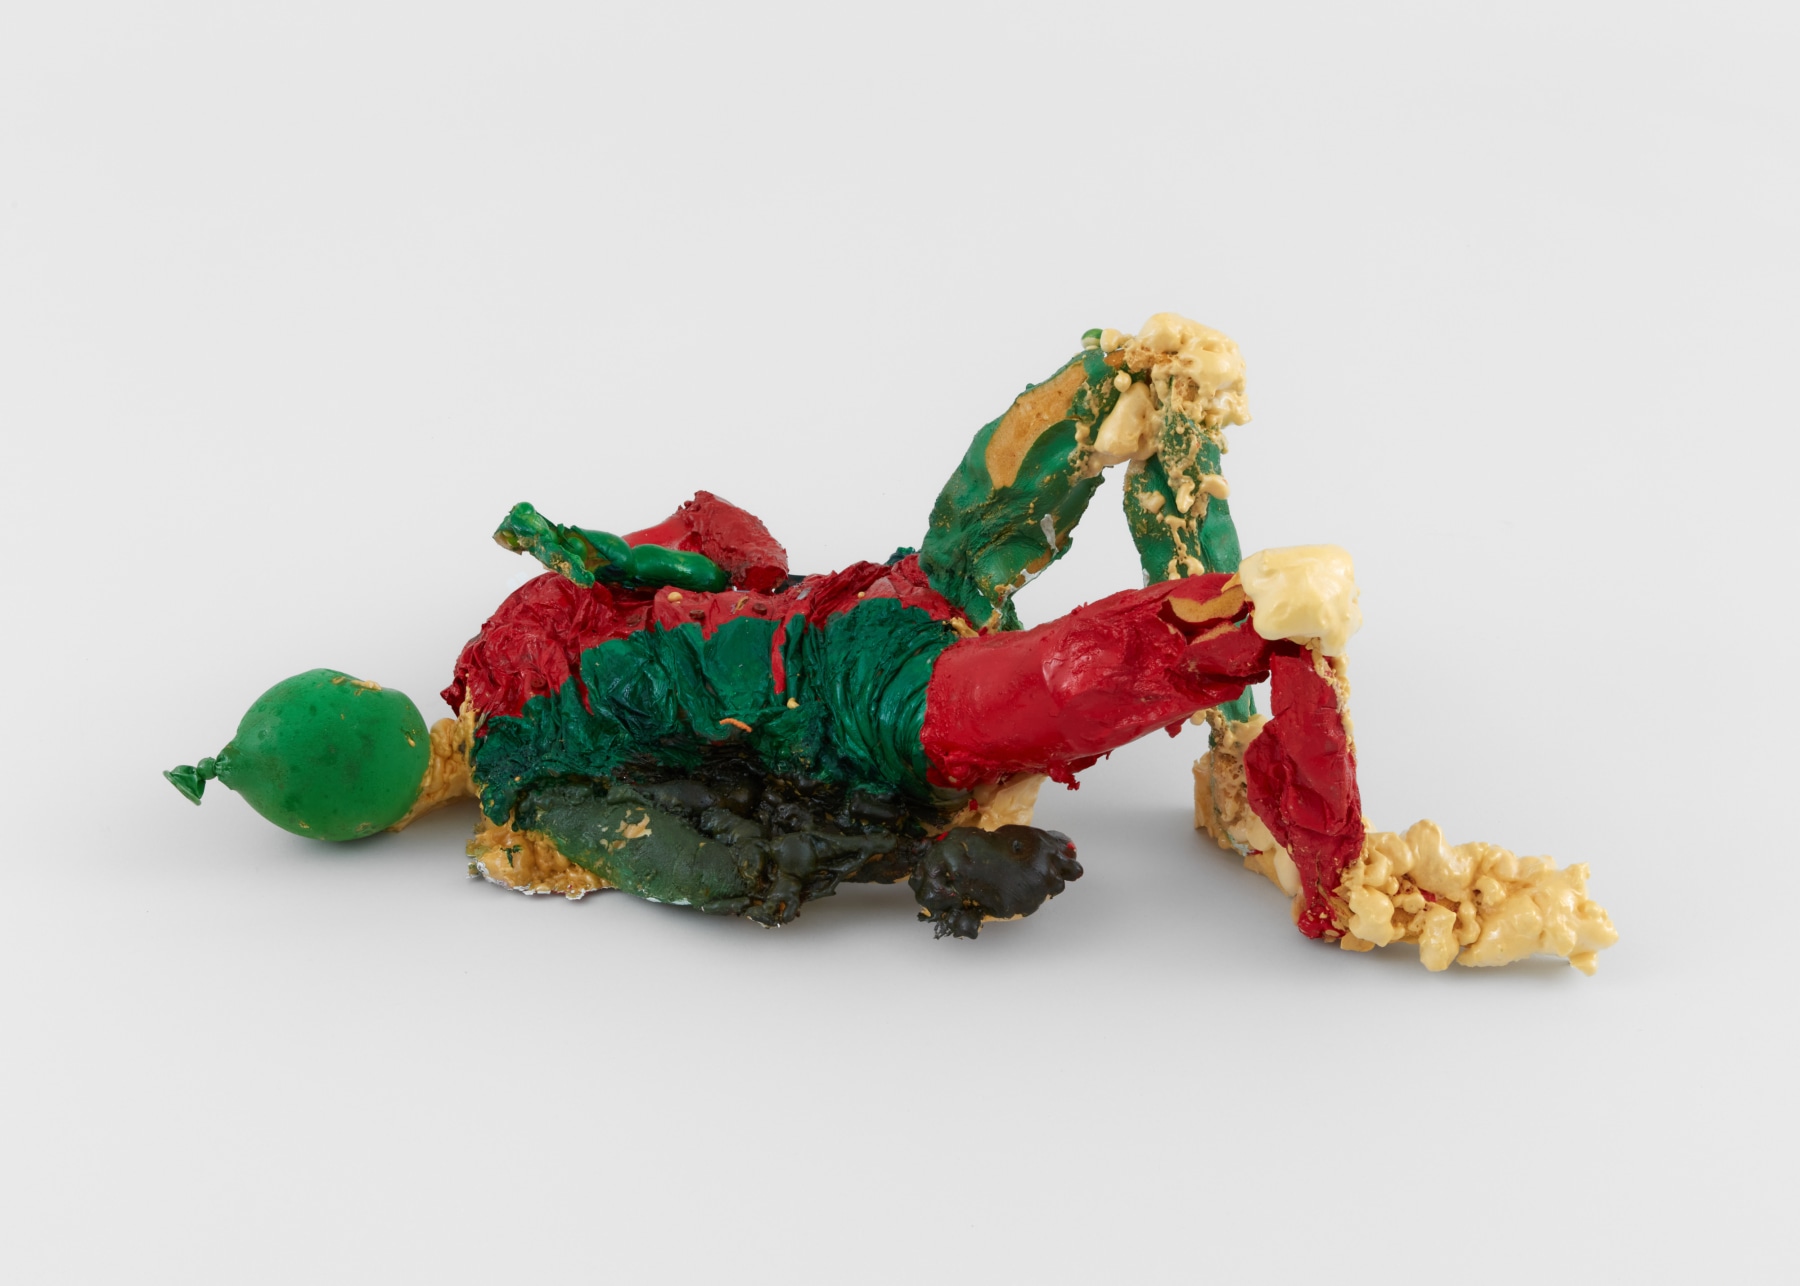 A free standing sculpture of a reclining figure painted red and green with a balloon for a head holds a pod of peas with spray foam bulging out from the knees and feet.